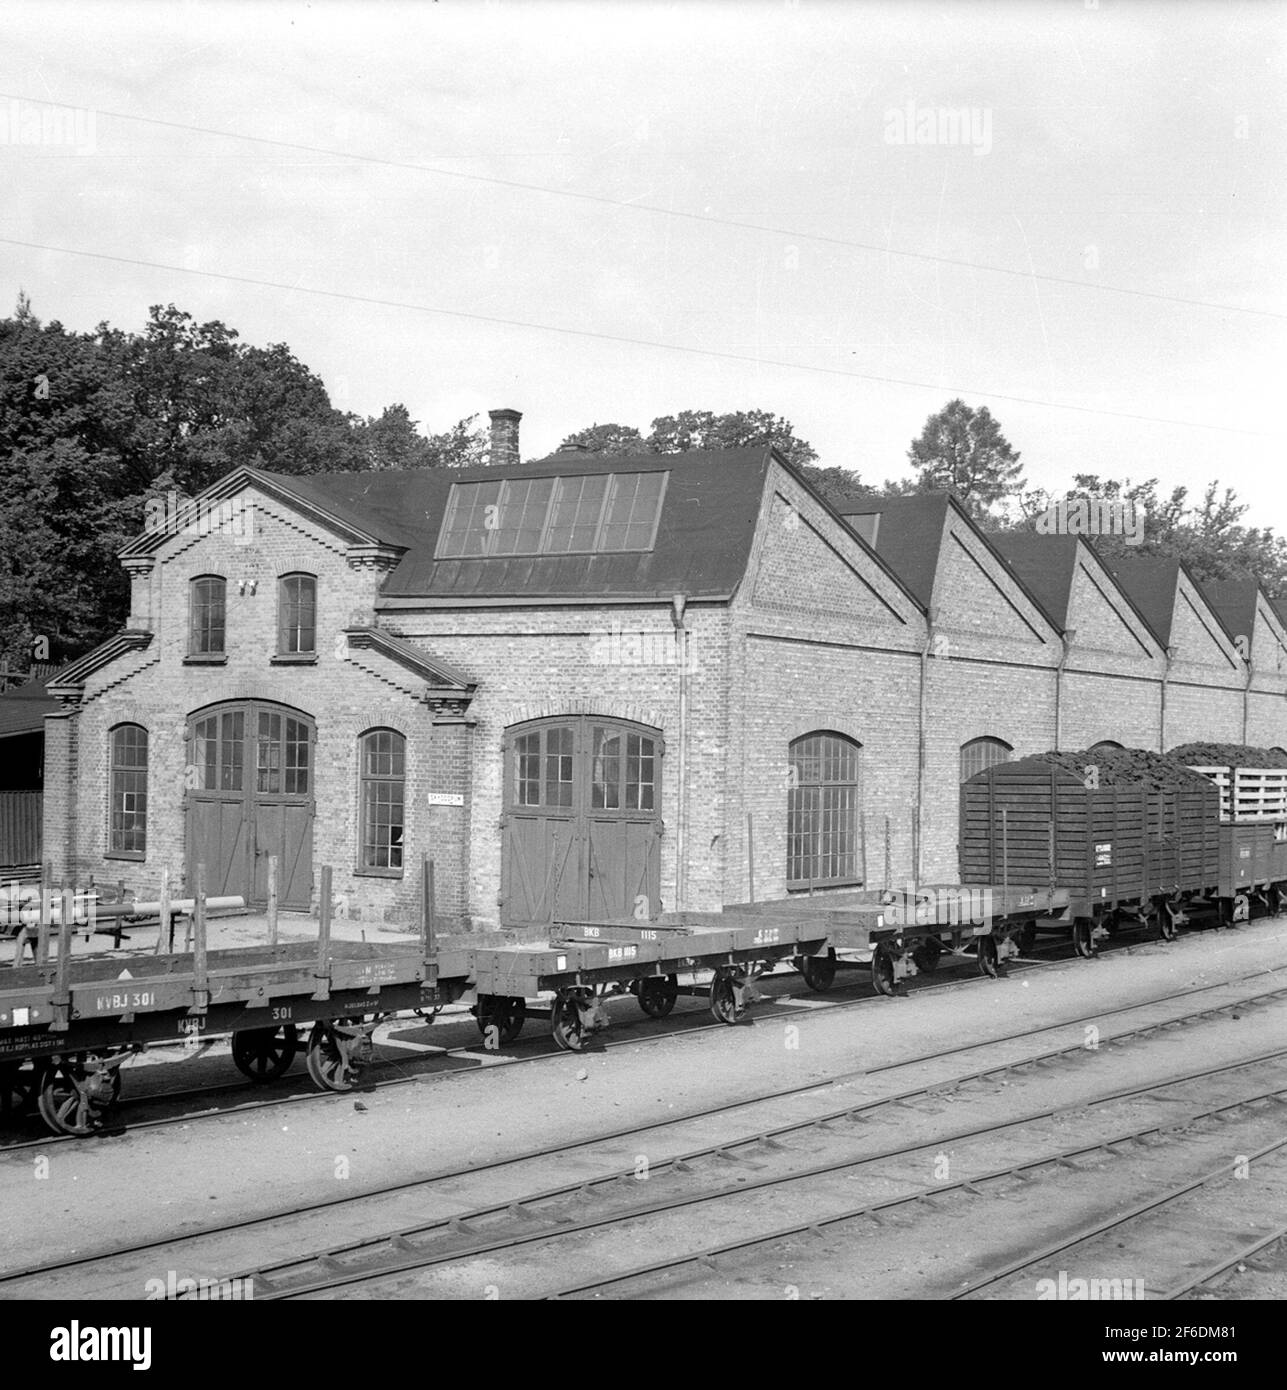 Karlshamn's railway workshops with various freight wagons in the foreground, including KVBJ 301, BKB 1115, BKB 1128. Stock Photo